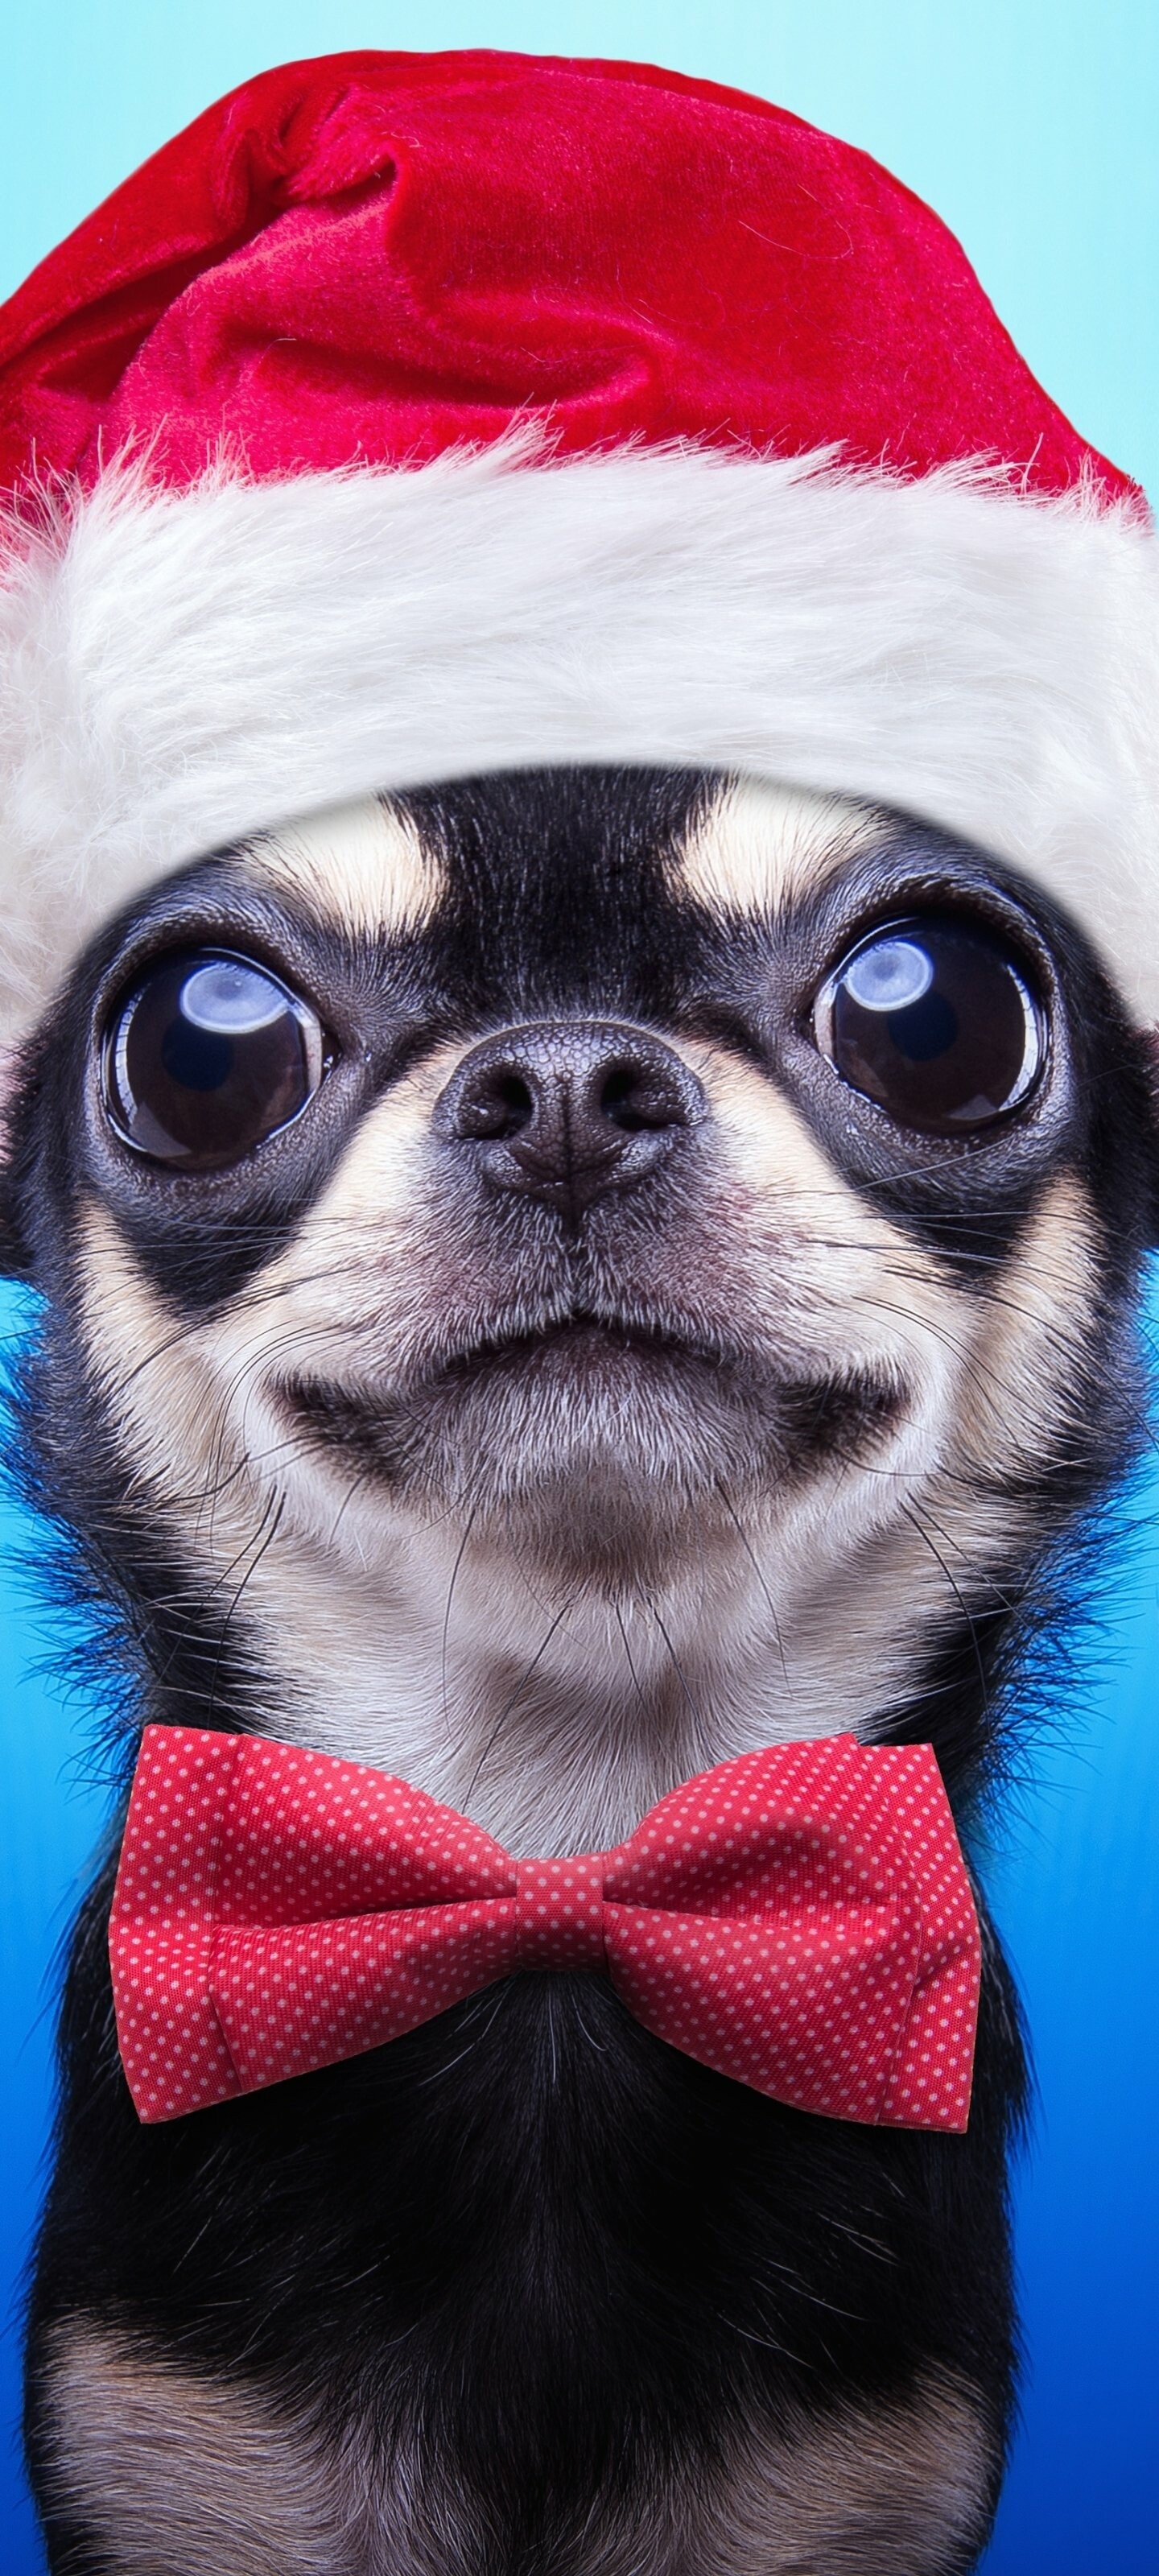 Puppy: Chihuahua, A Mexican breed of toy dog, Animal. 1440x3200 HD Background.